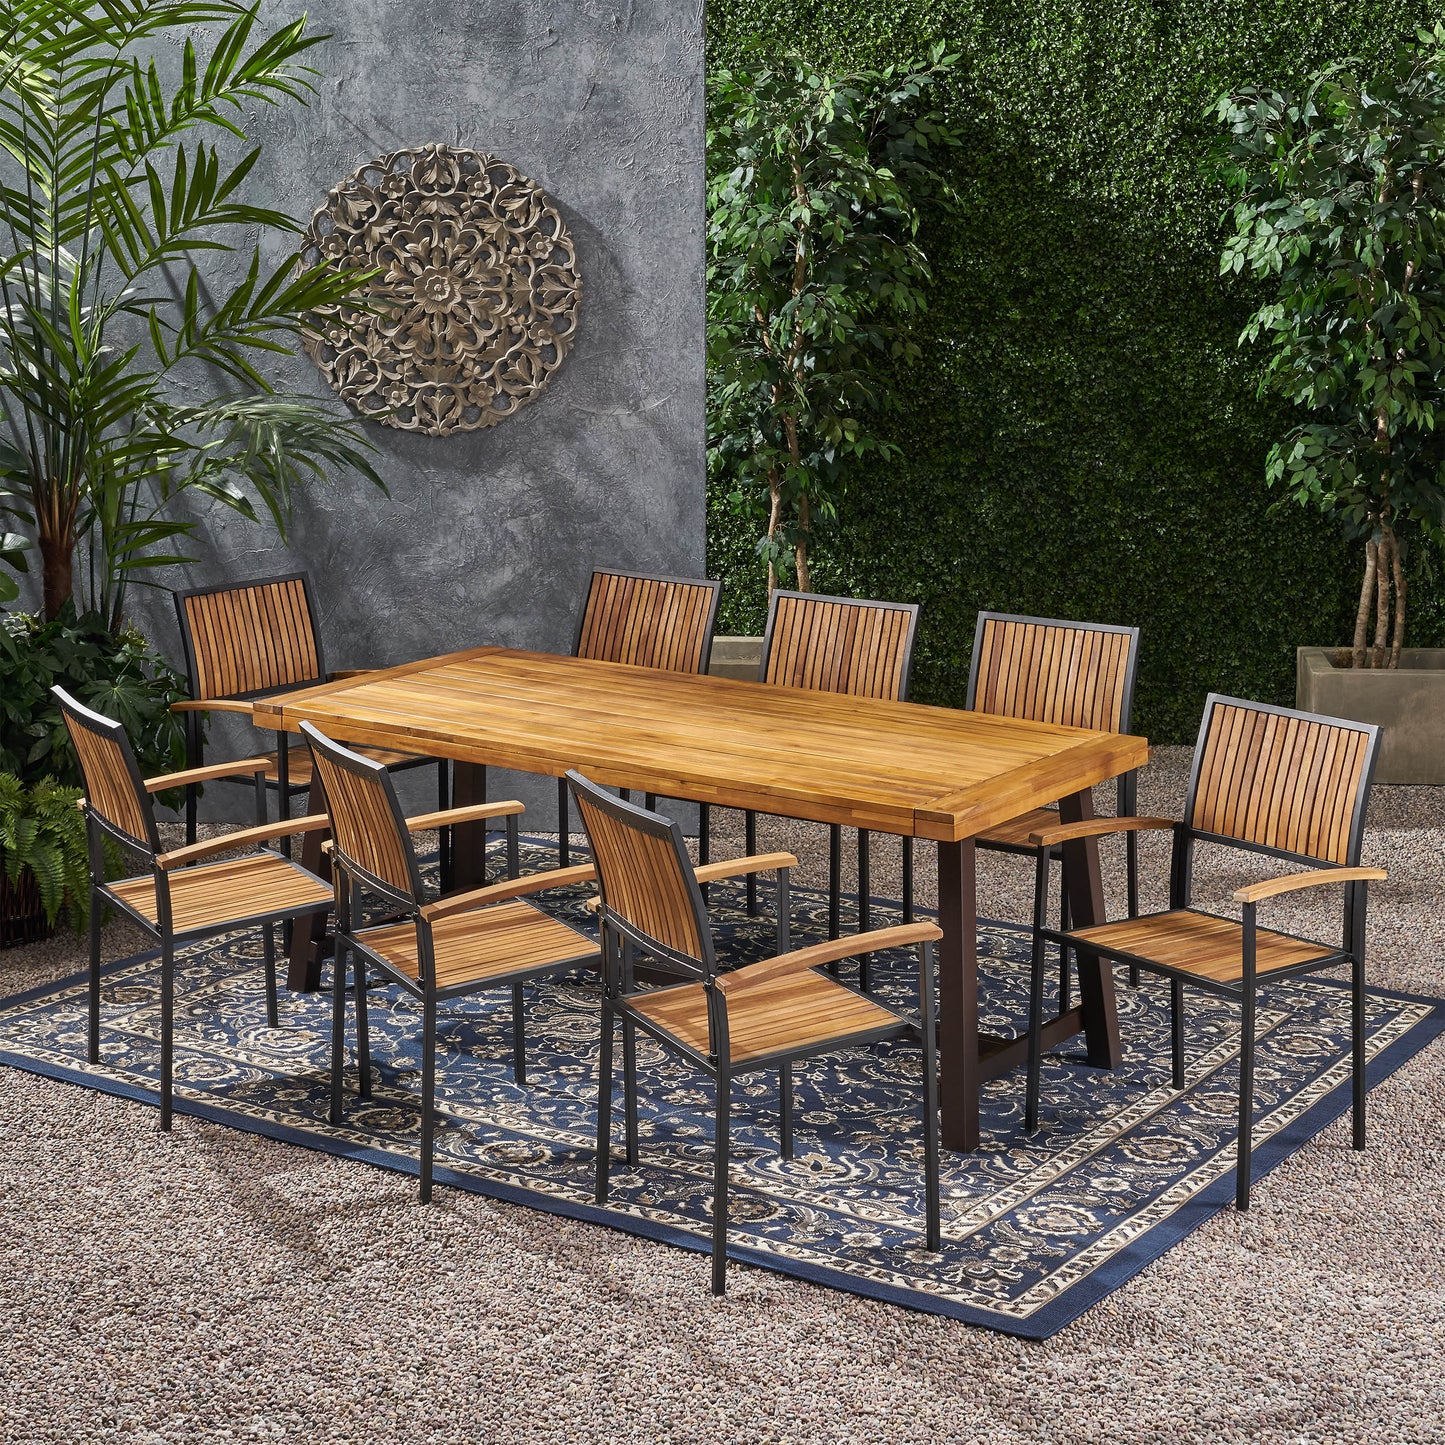 Cherry Outdoor Acacia Wood 8 Seater Dining Set